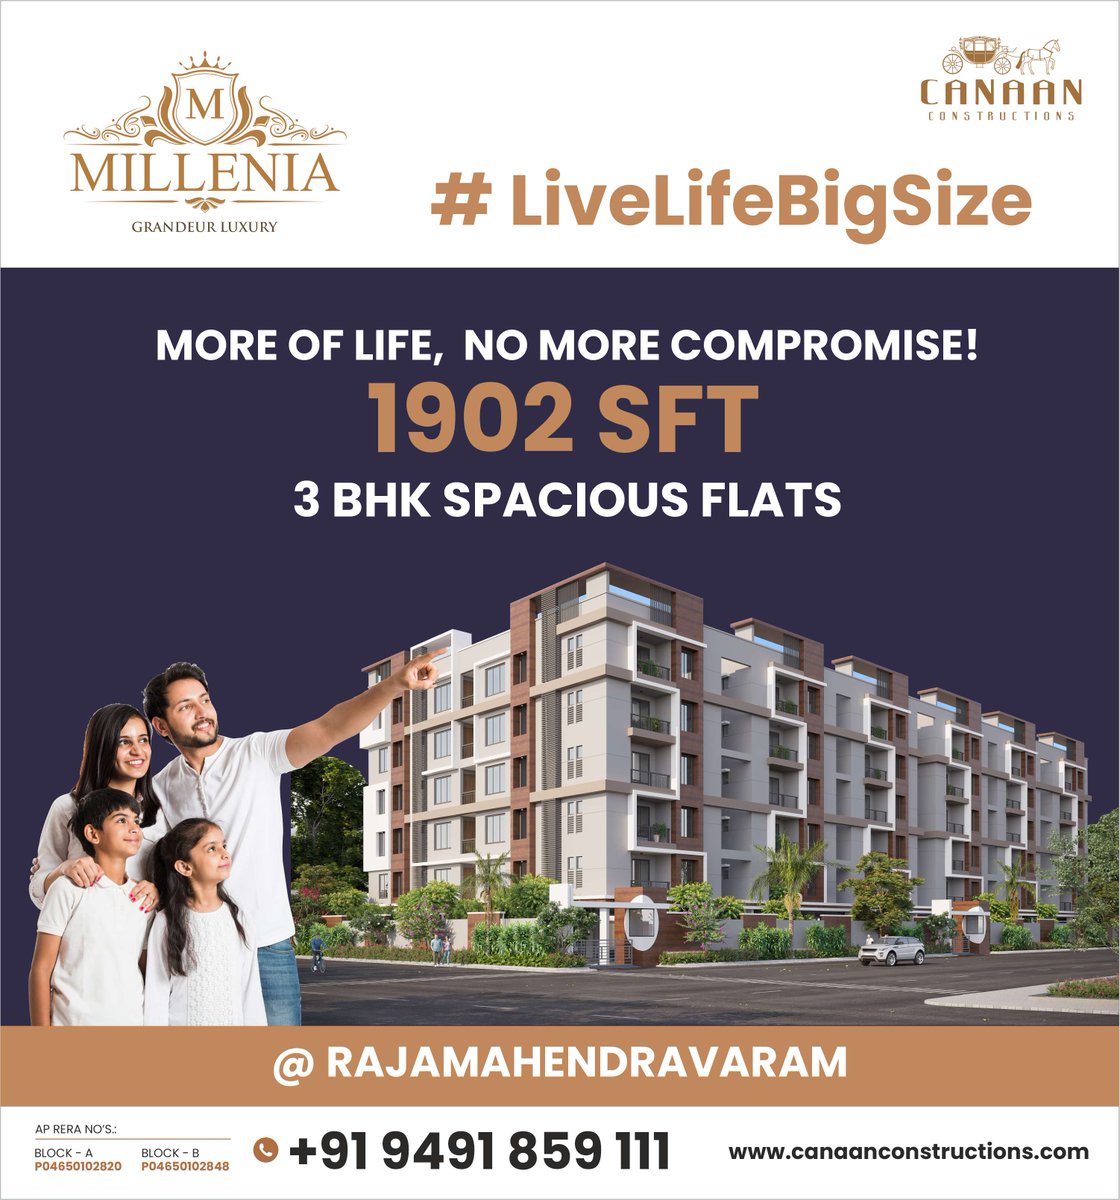 Experience the Future of Living at Millenia Projects!
For more details:
contact:9491859111
website:-www.canaanconstructions.com
#themilenia
#dreamhome
#canaanconstruction
#gatedcommunity
#flatsforsale
#apartmentsforsale
#flatsinandhrapradesh
#SpaciousApartments
#luxuryapartments